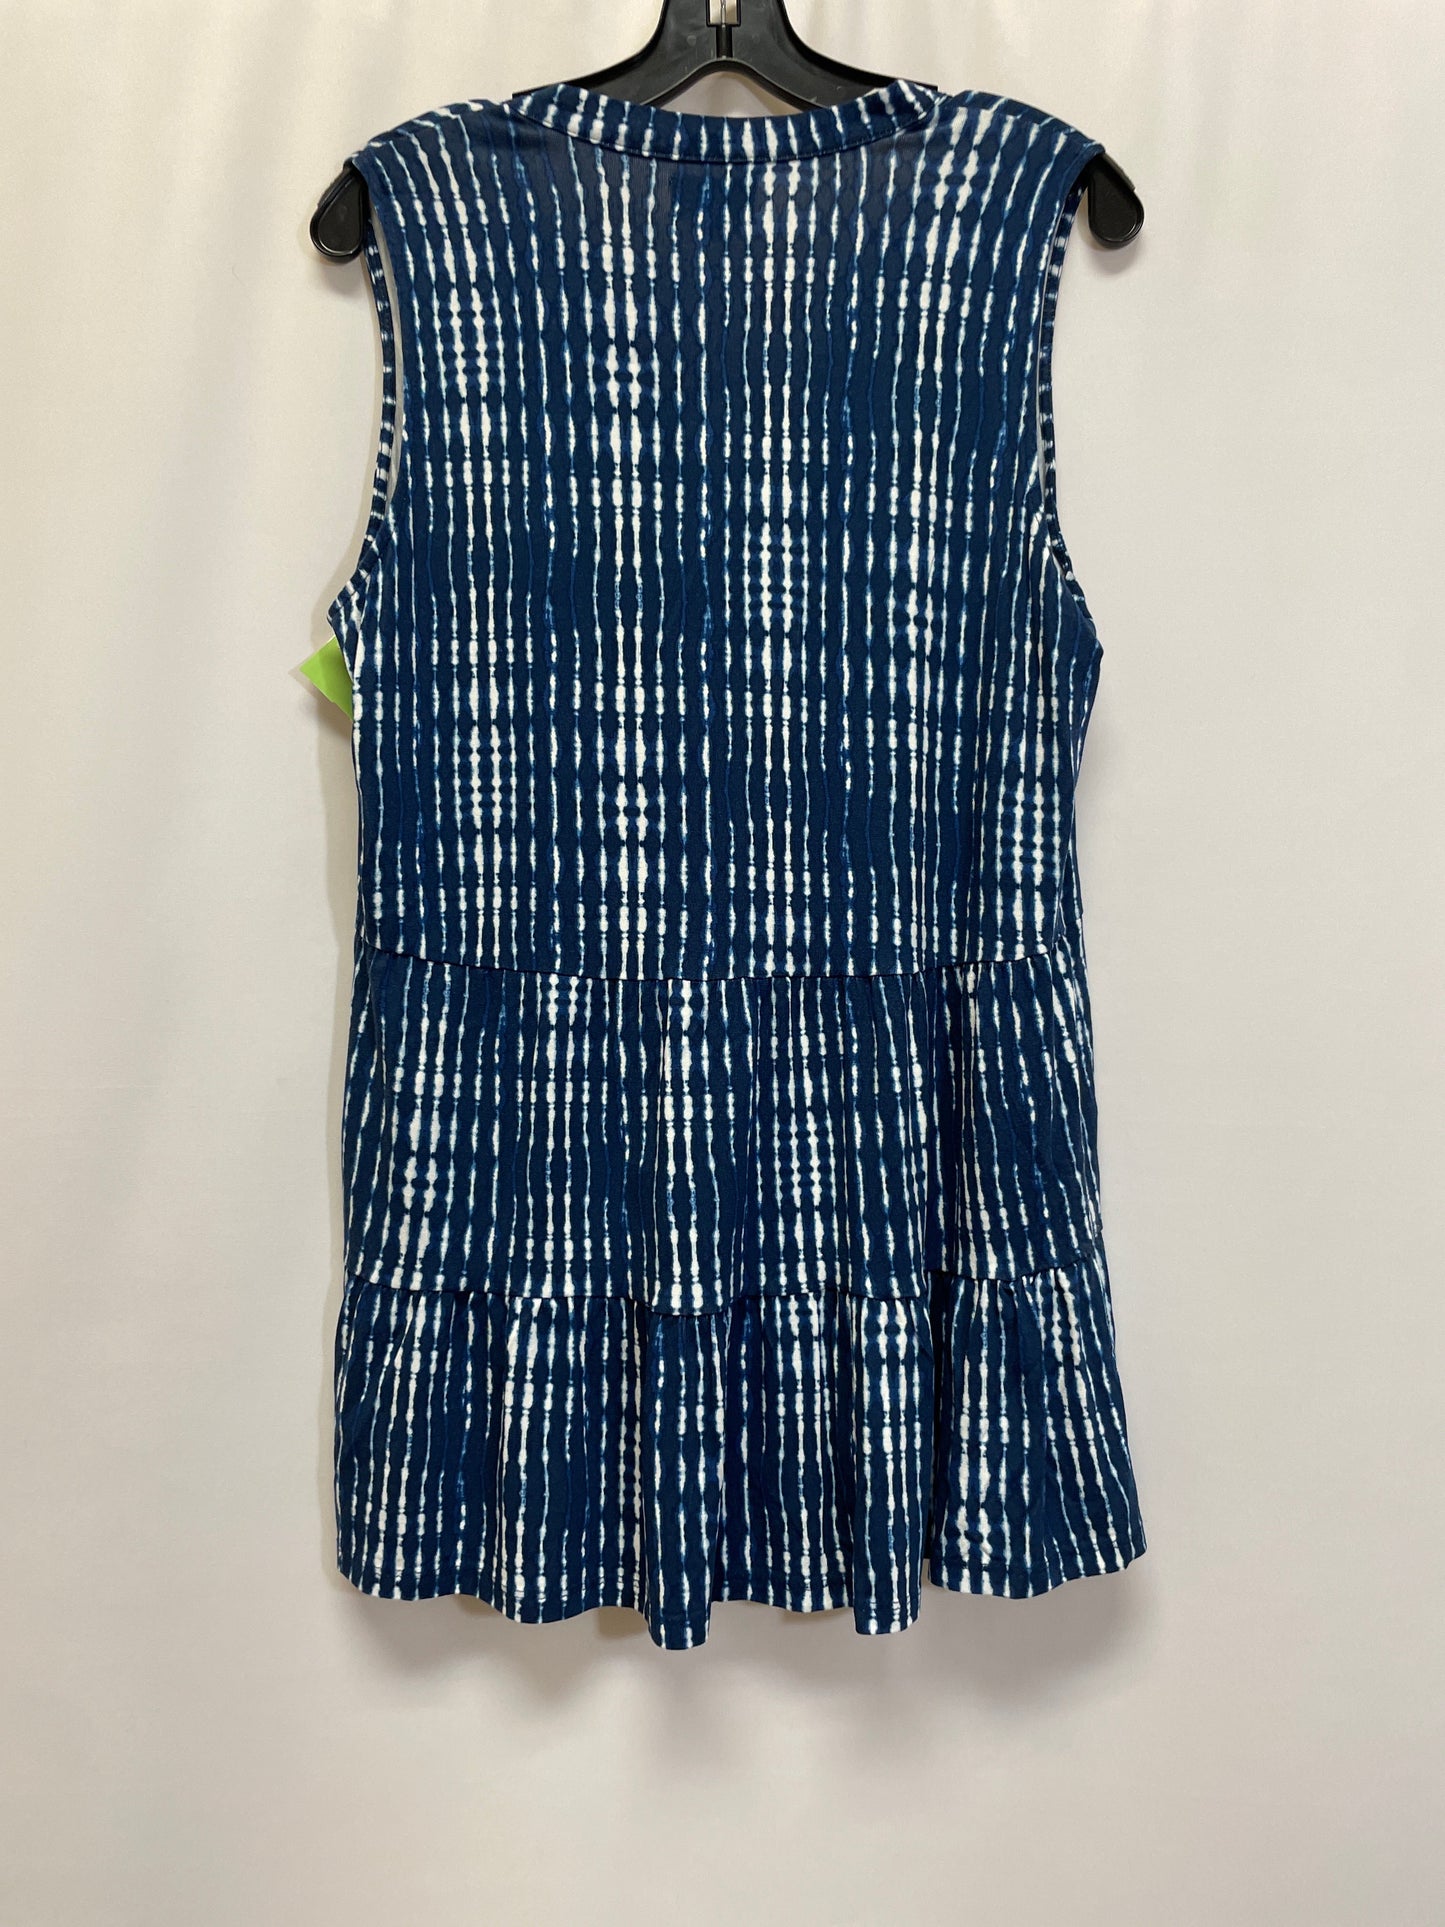 Top Sleeveless By Wonderly  Size: L